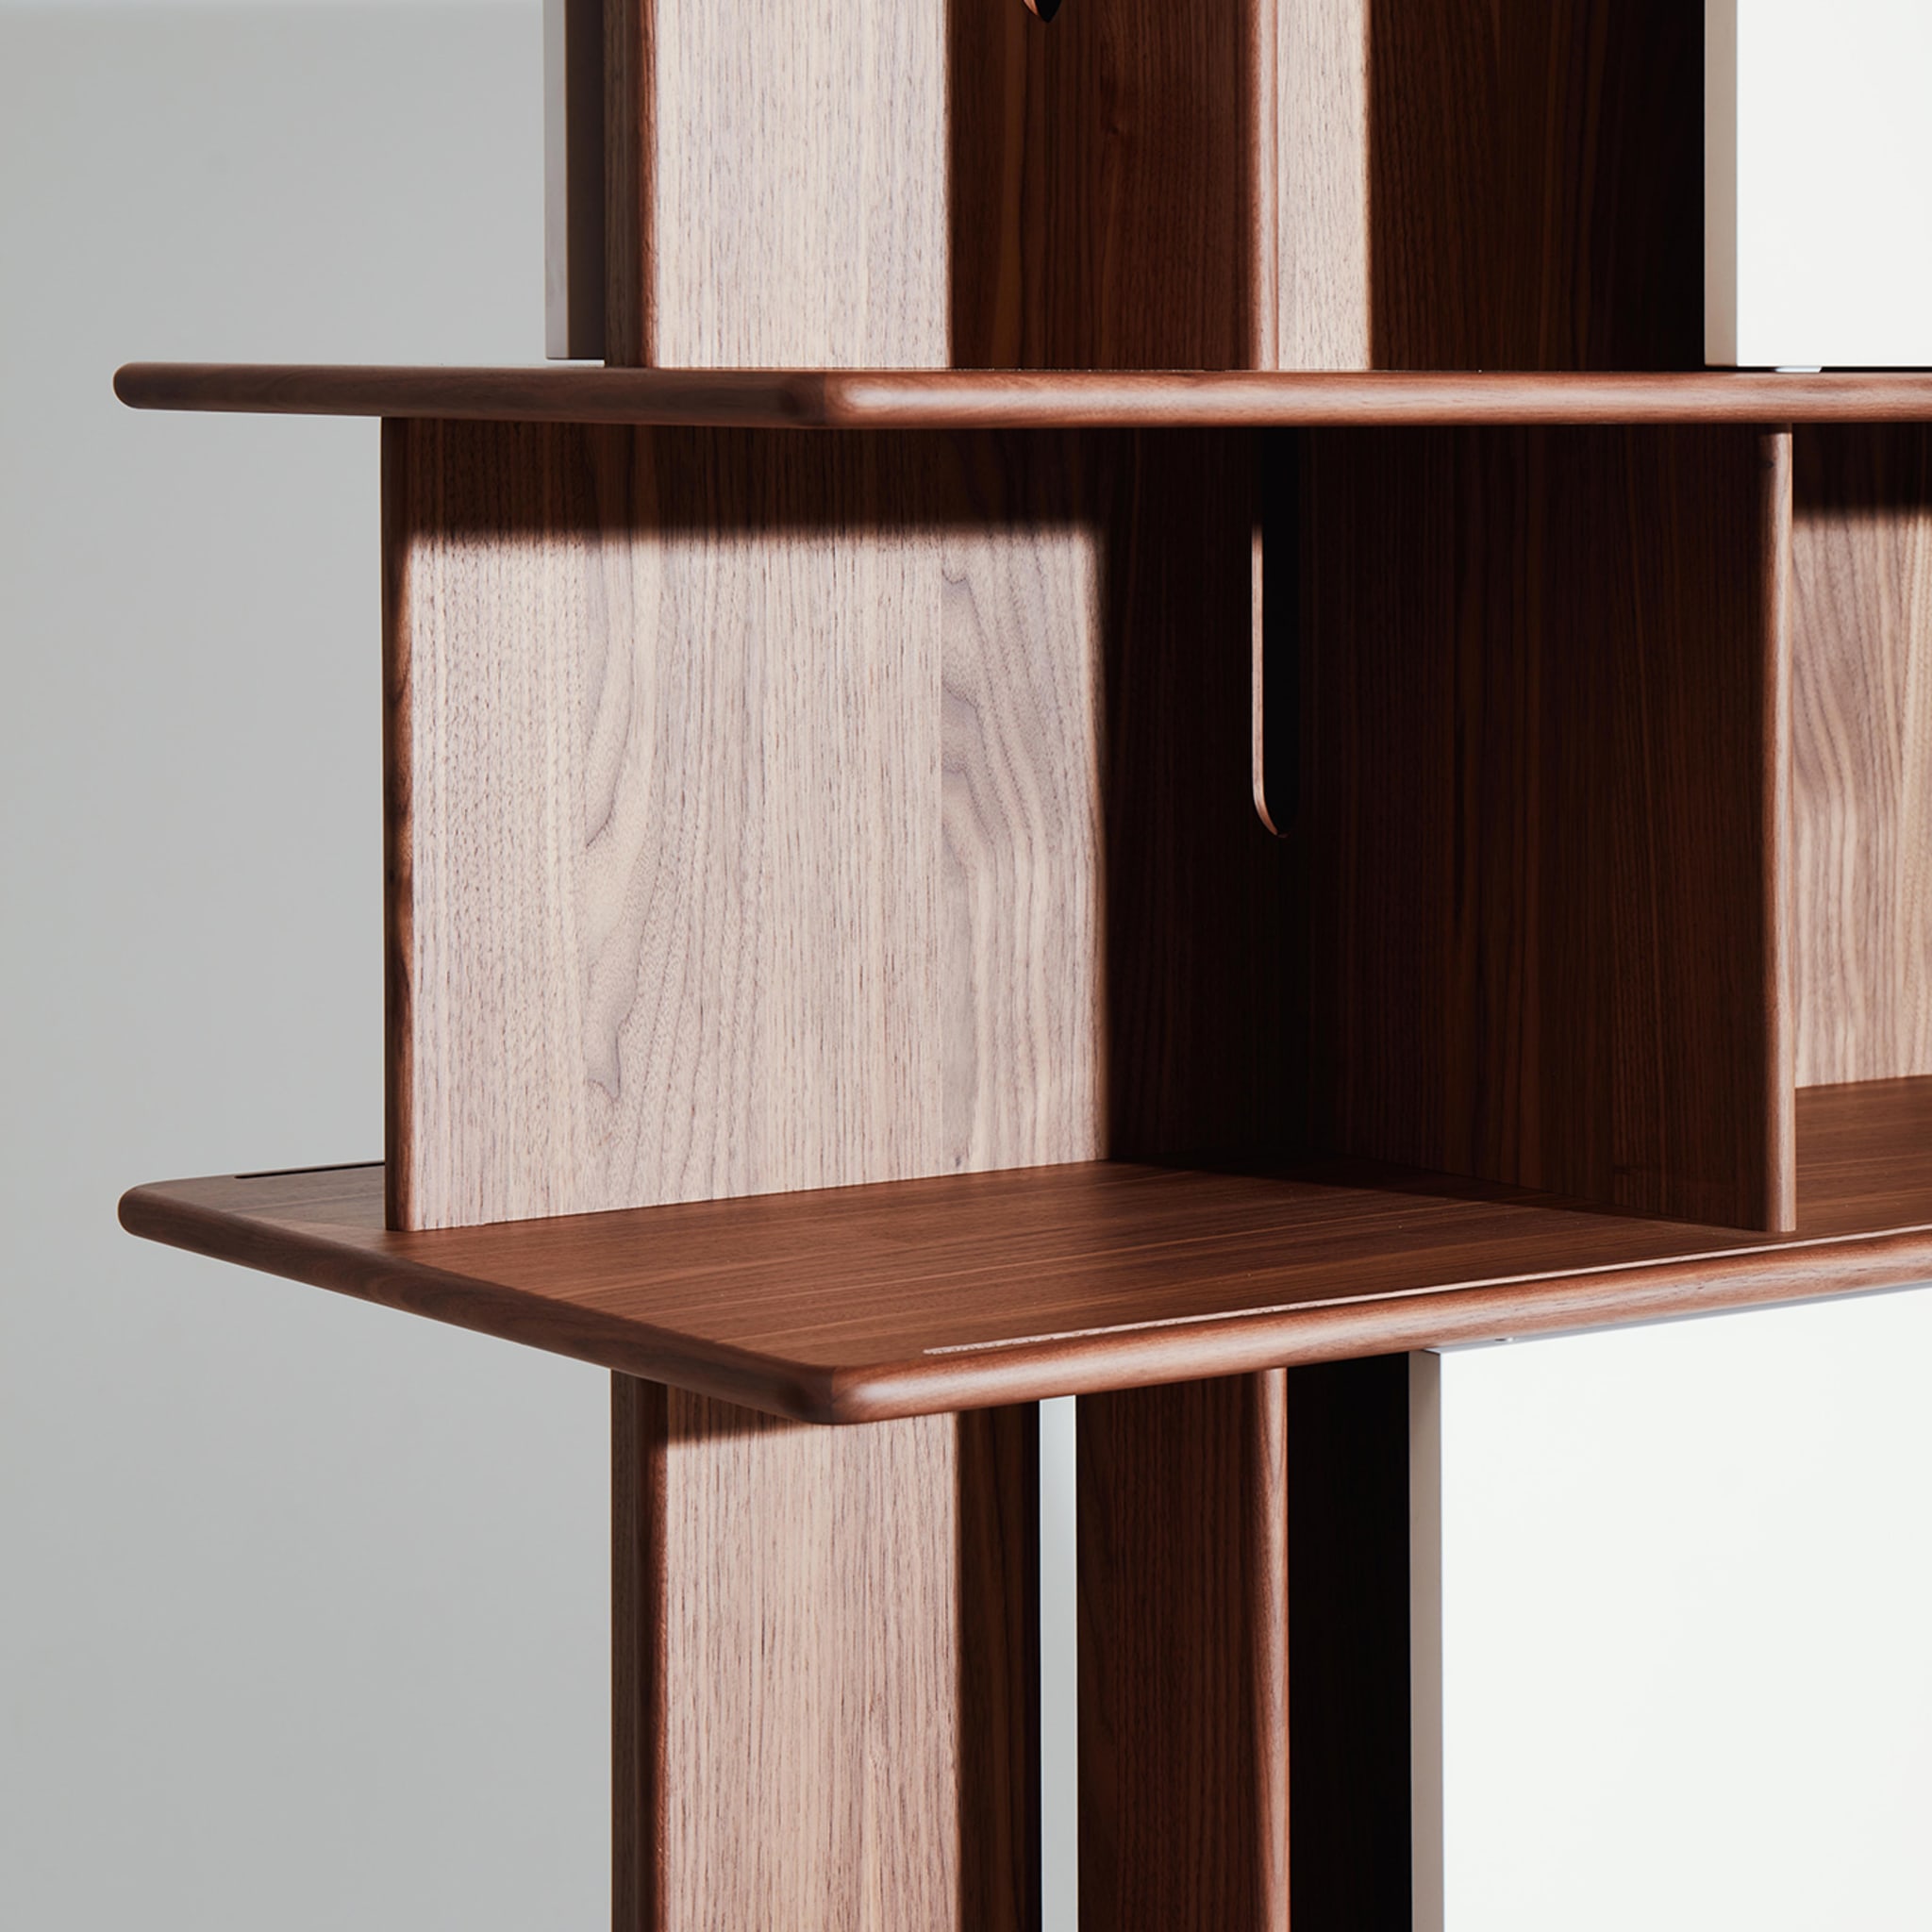 Intersection Large Bookcase by Neri&Hu - Alternative view 1